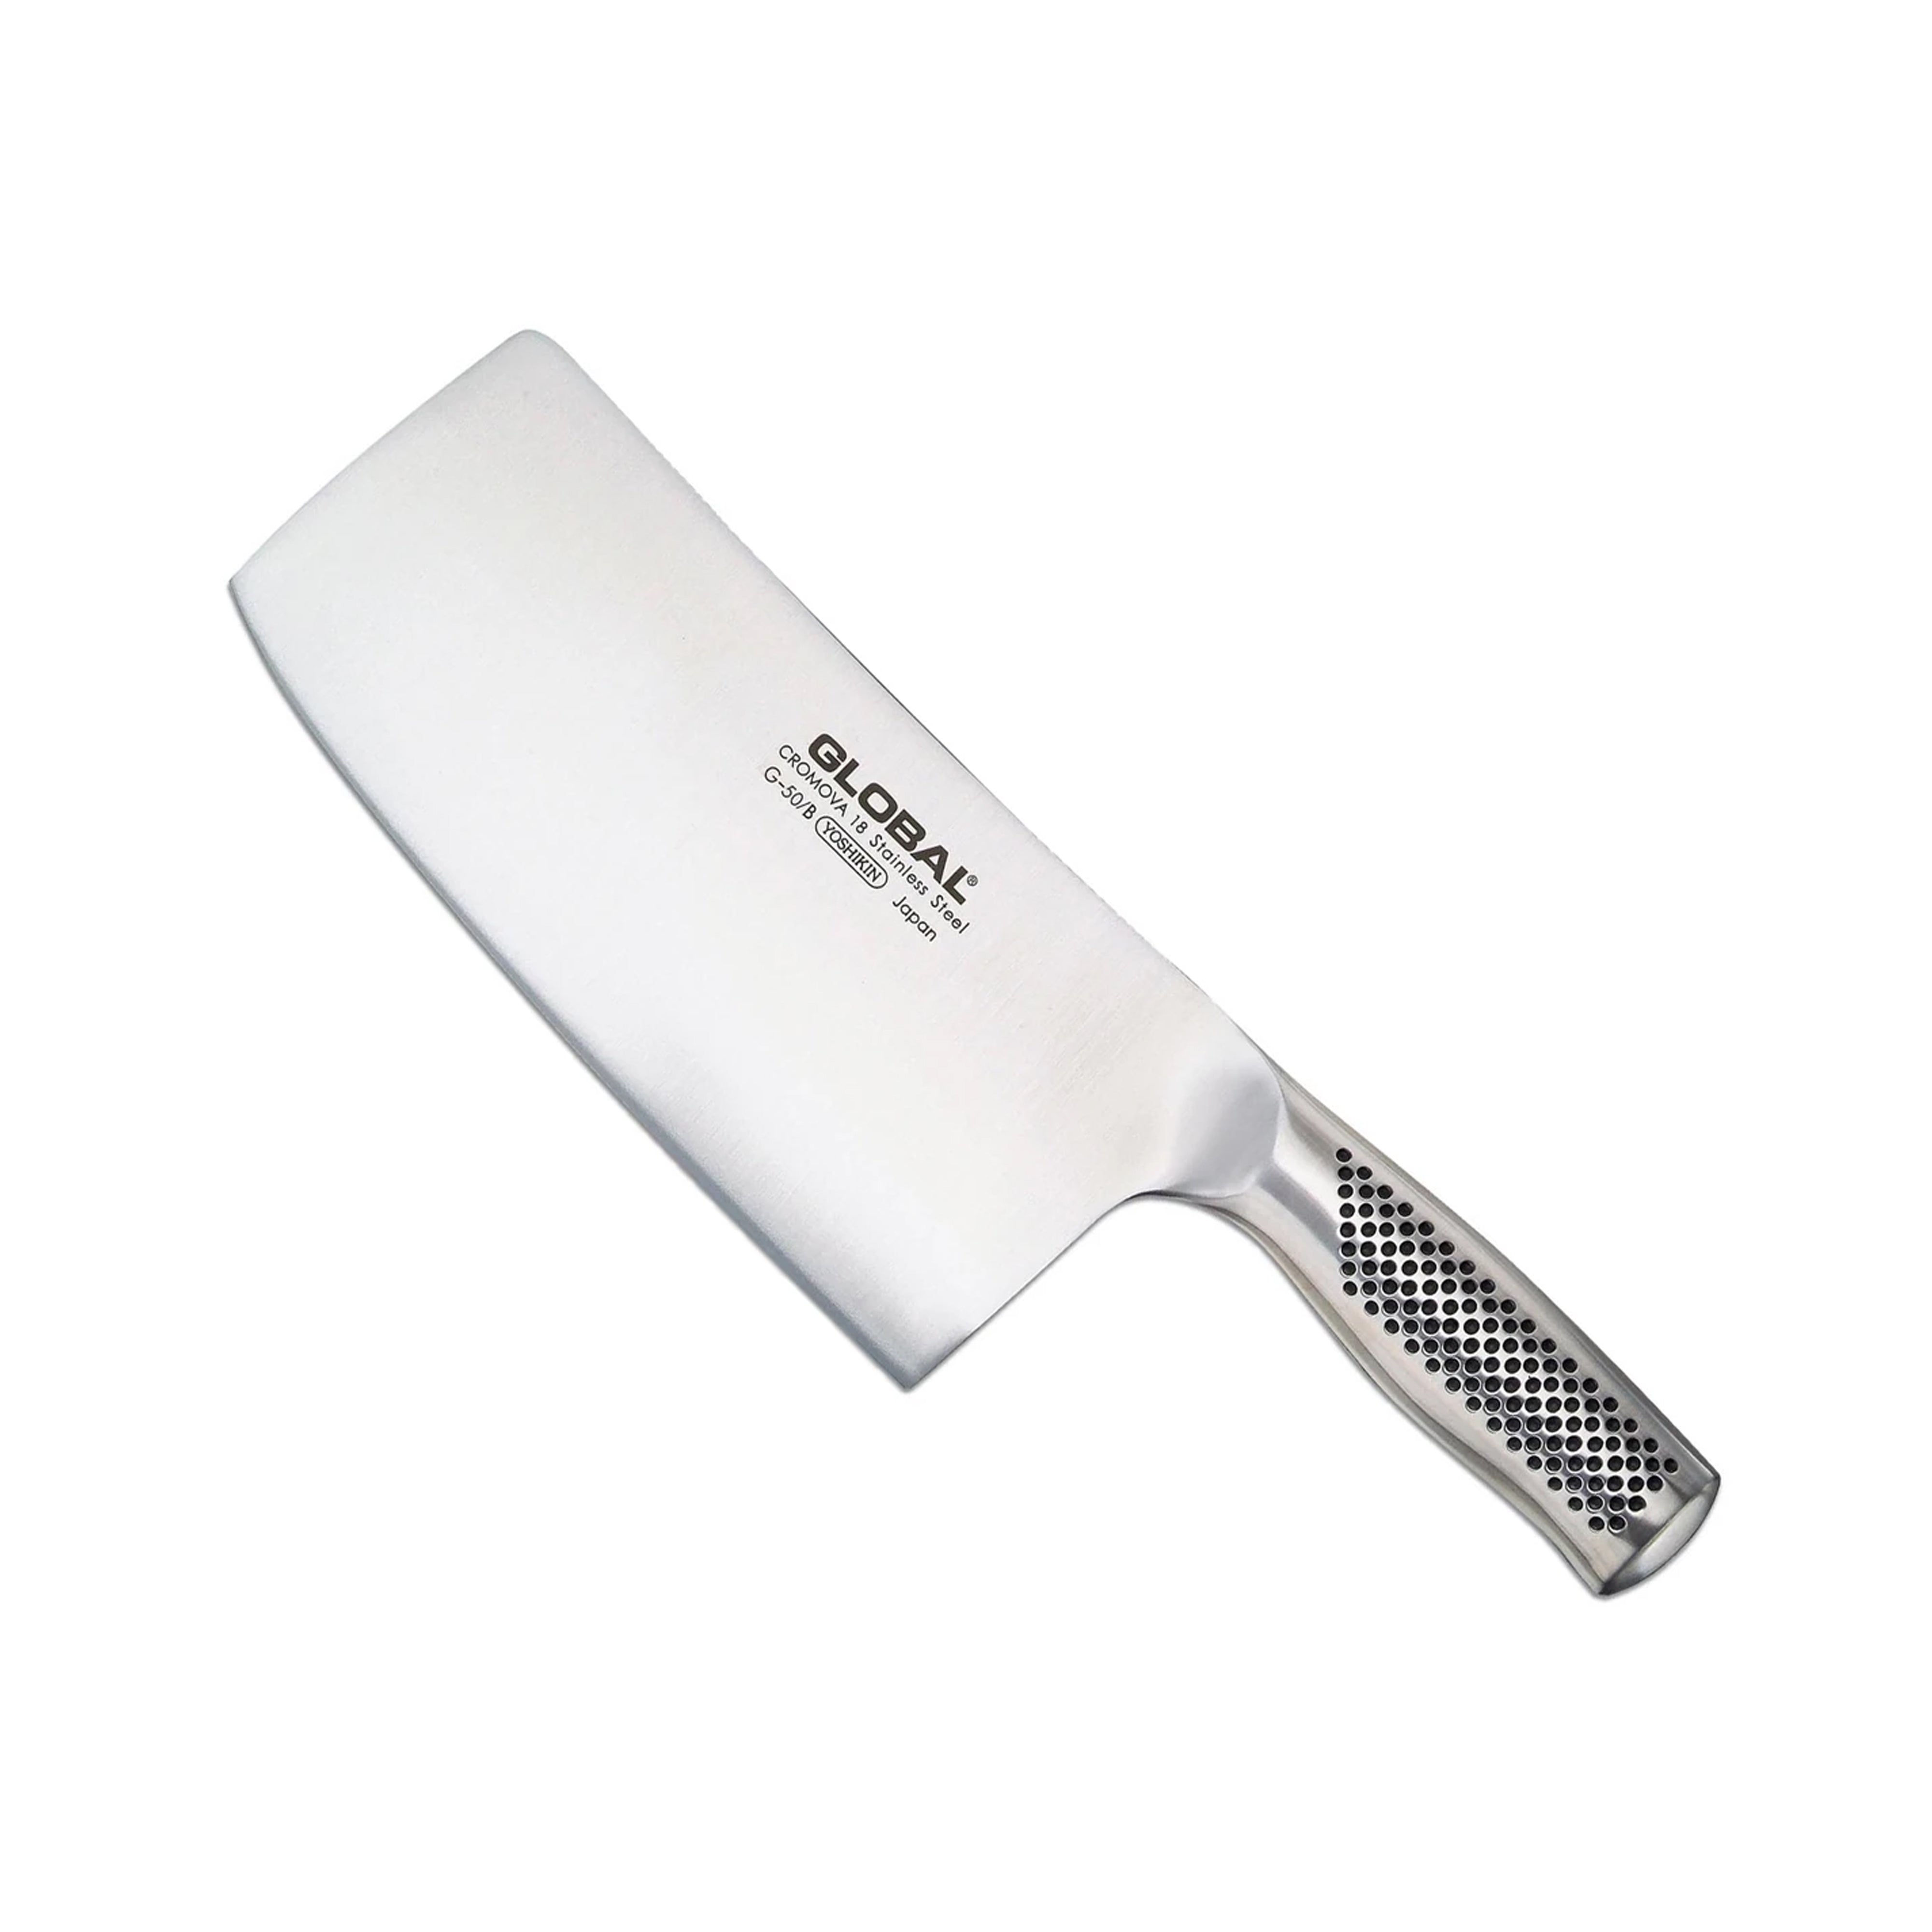 Global G 6.25 Meat Cleaver